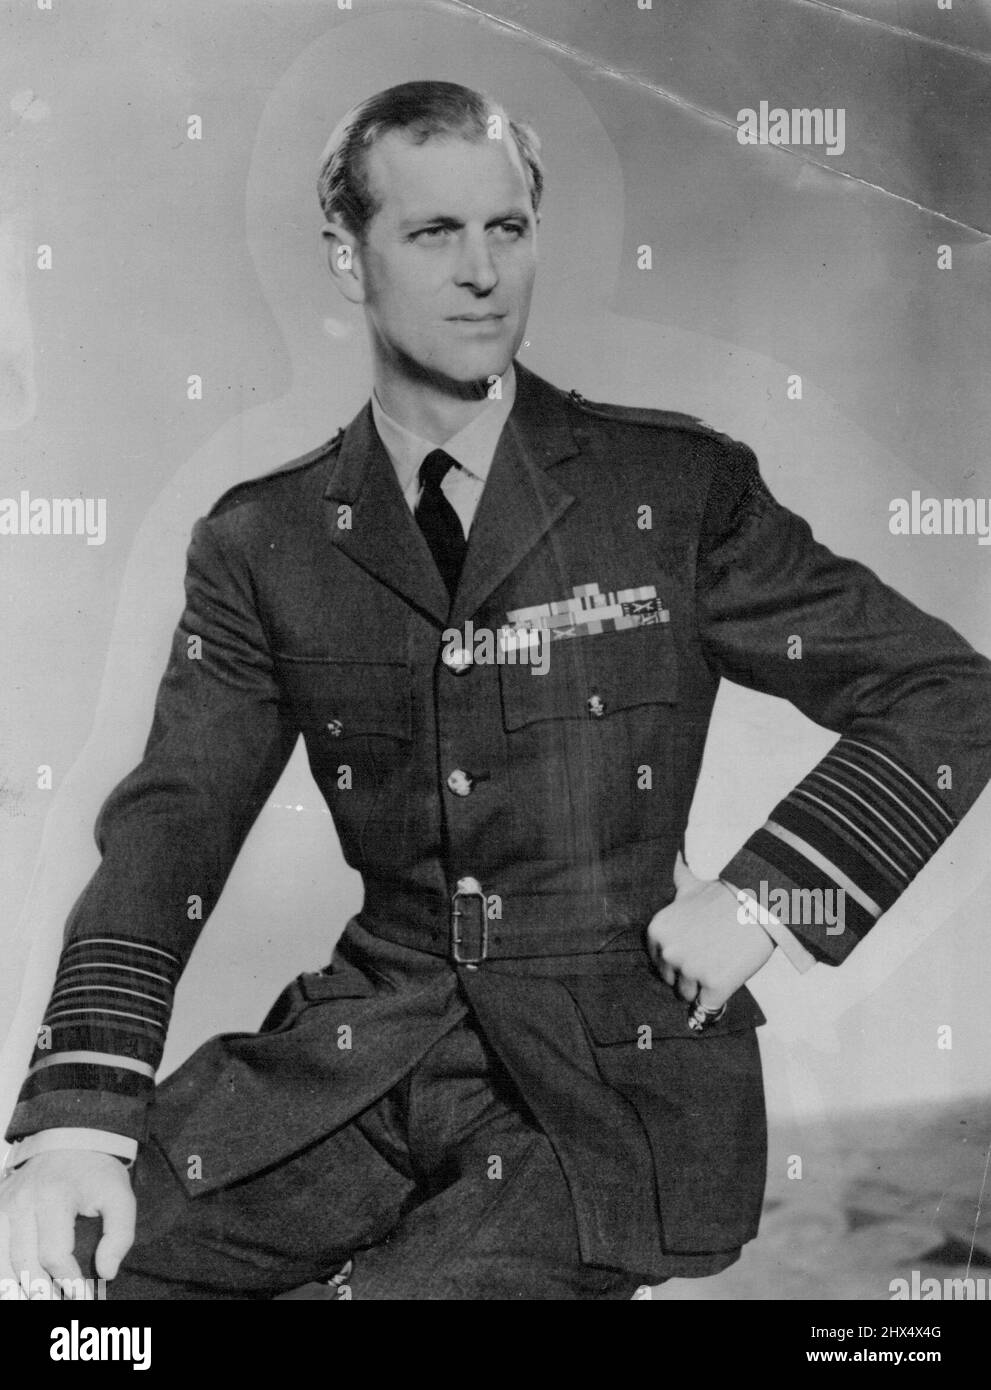 The Duke as a Marshal of the Royal Air Force: This latest Royal Command Portrait by Baron shows H.R.H. The Duke of Edinburgh in his uniform as a Marshal of the Royal Air Force - one of his recent promotions. March 17, 1953. (Photo by Reuterphoto). Stock Photo